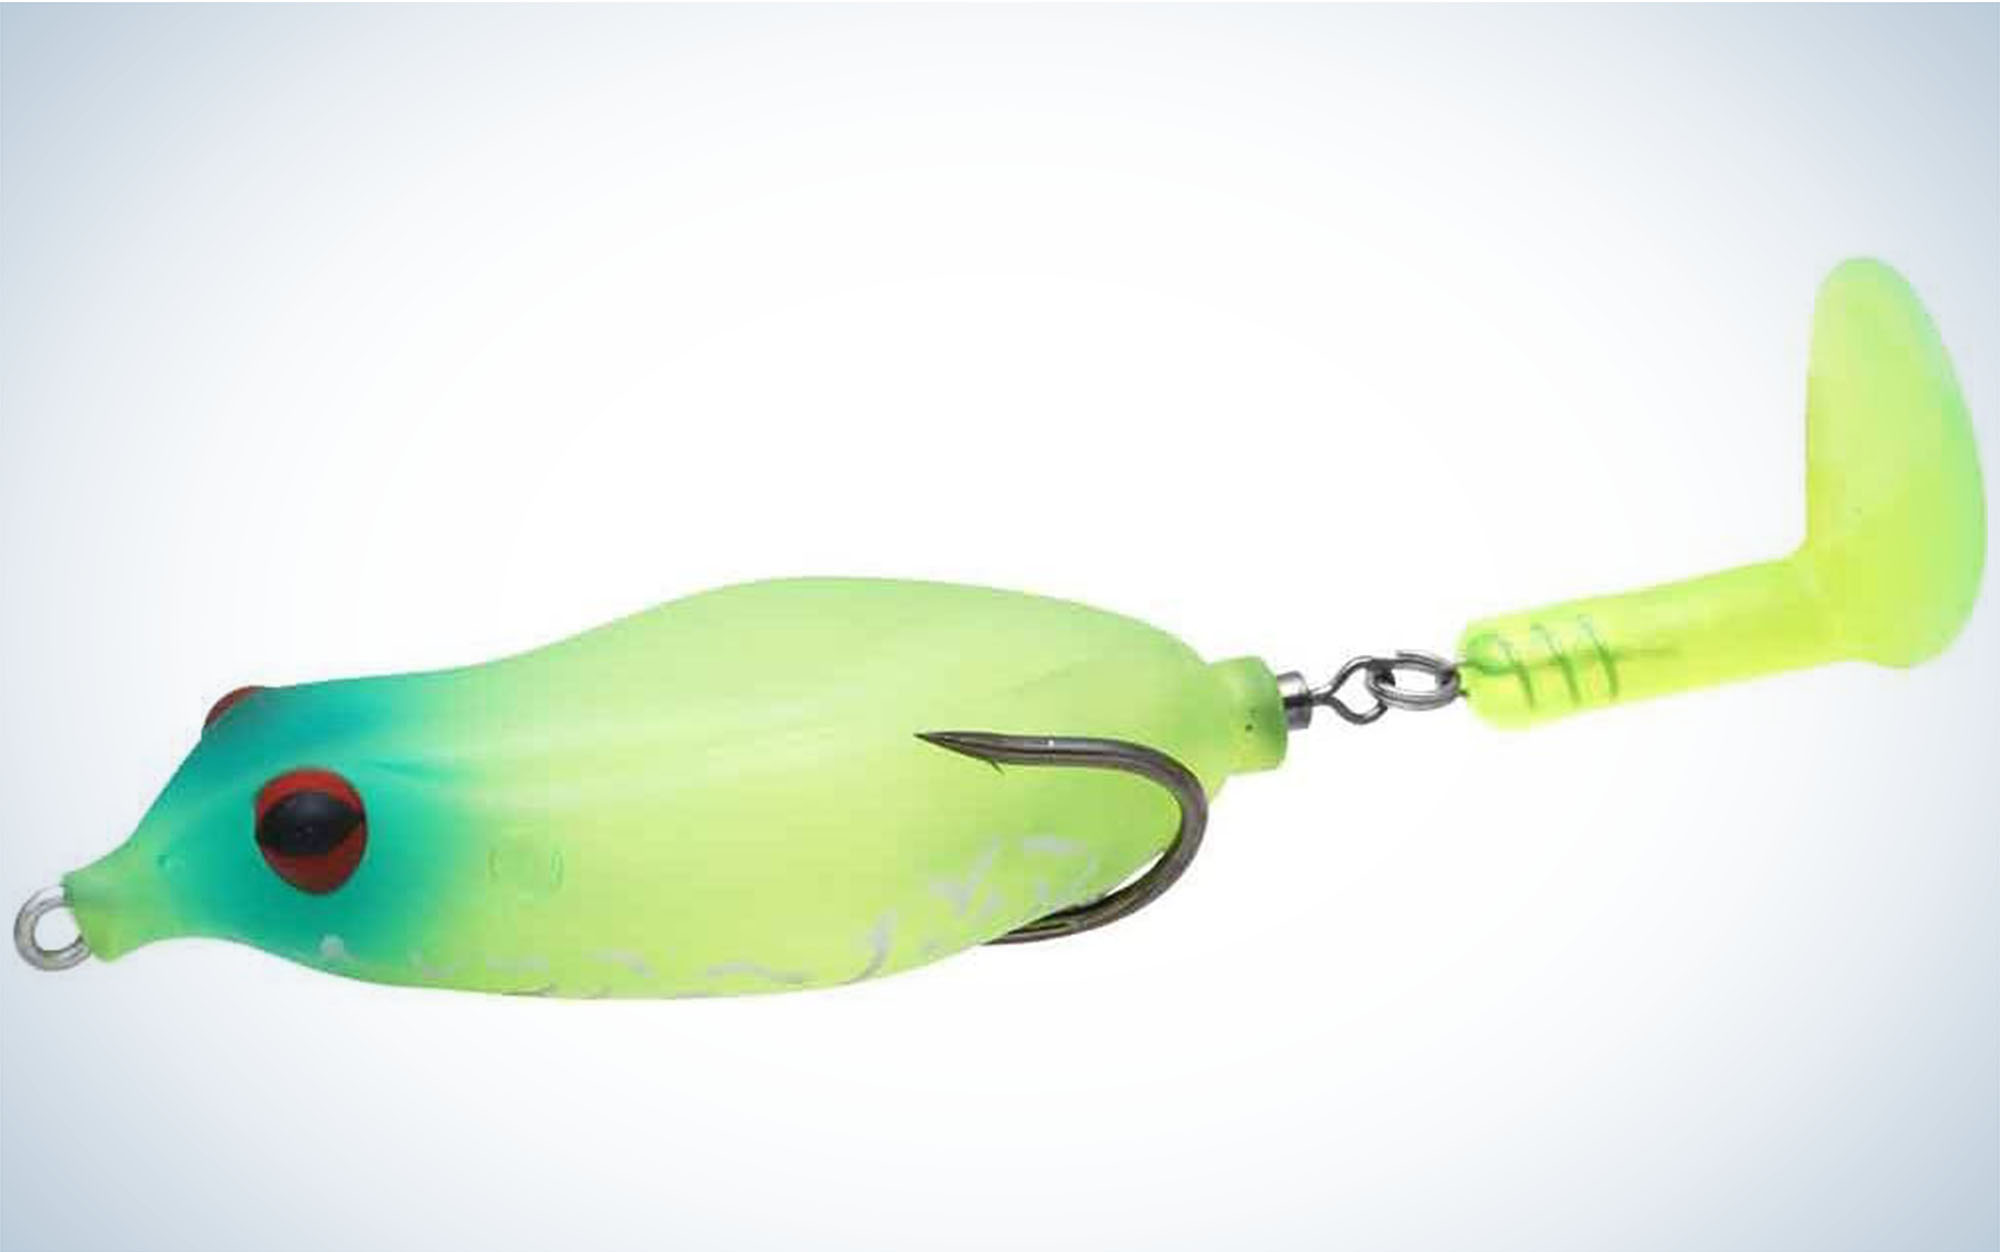 Fishing Lures Surface Tackle Topwater Lure Poppers Swimbait For Bass Pike Black Back